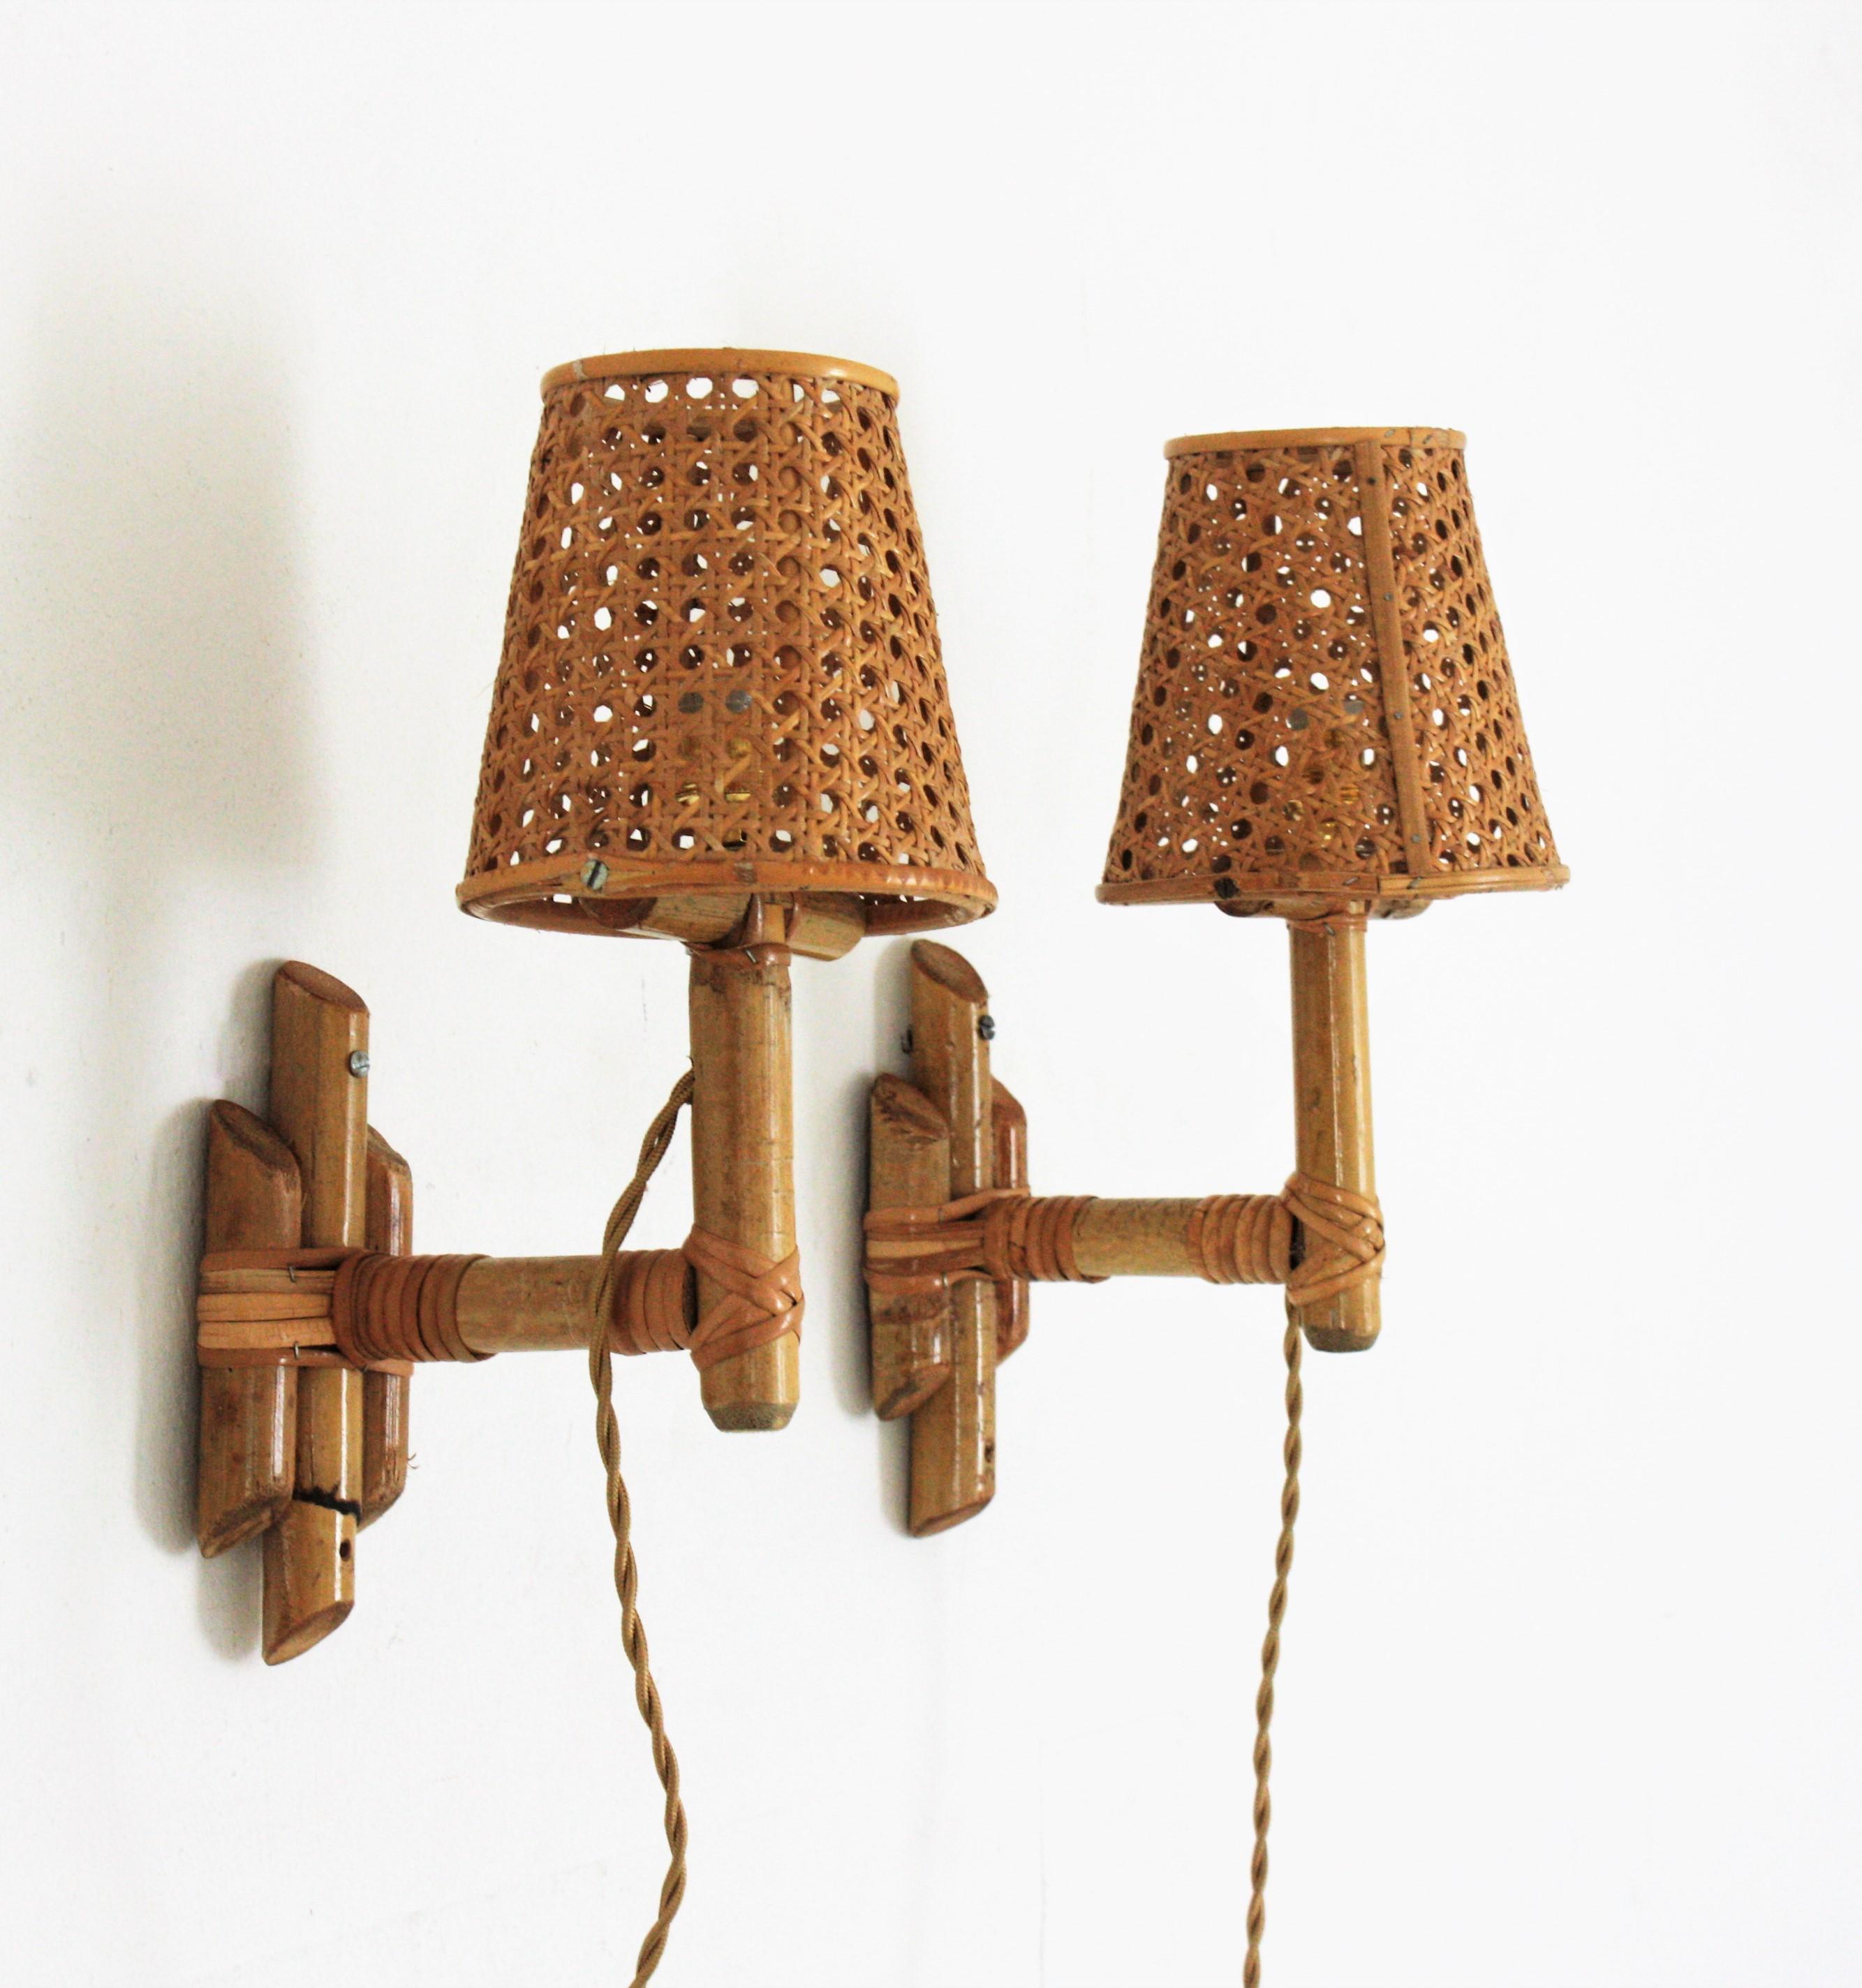 Pair of Italian Modern Woven Wicker Rattan and Bamboo Wall Lights with Shades In Good Condition For Sale In Barcelona, ES